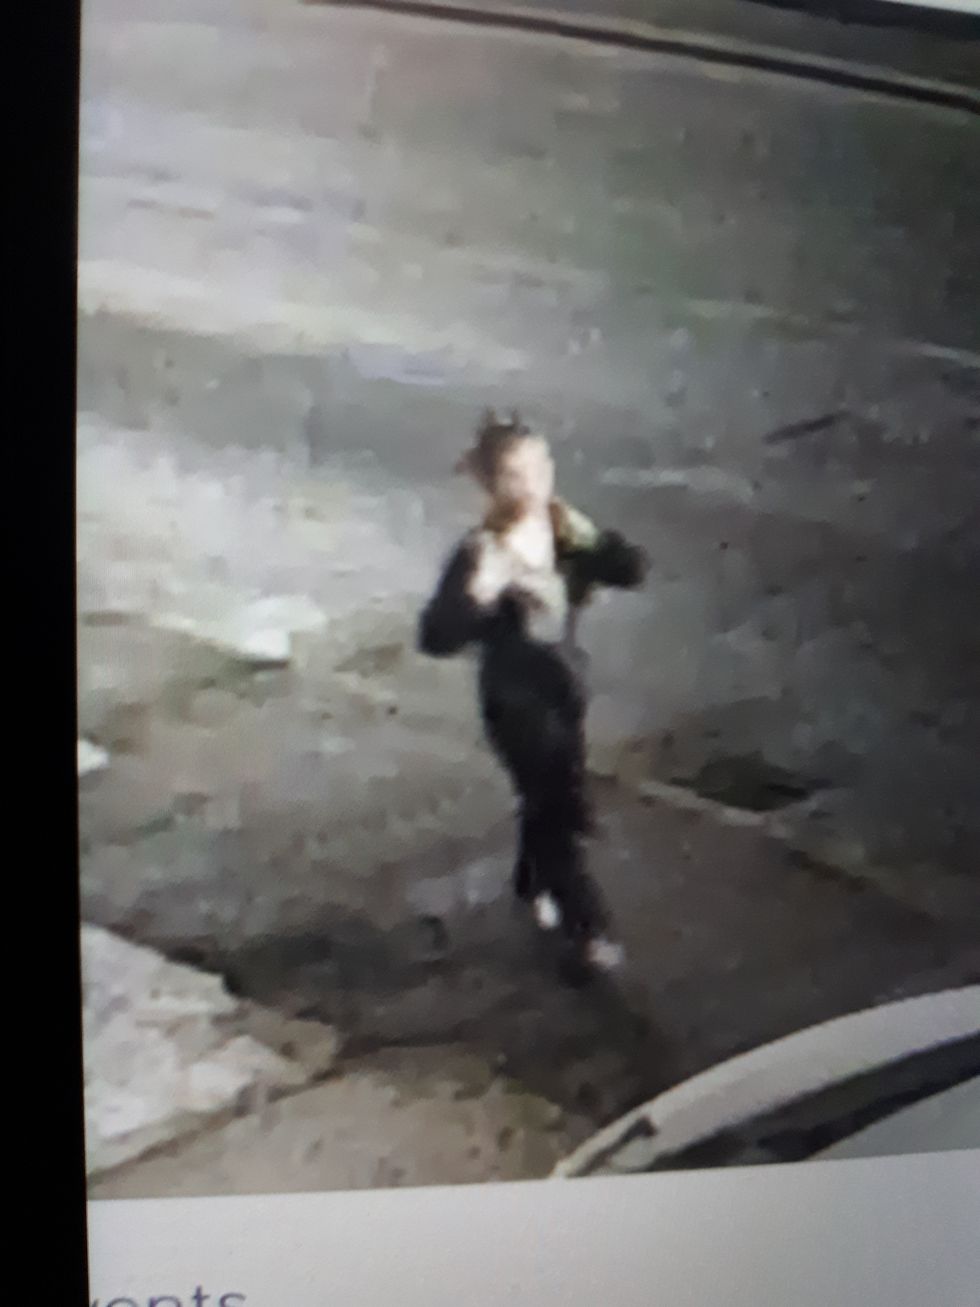 CCTV image of the eight-year-old boy